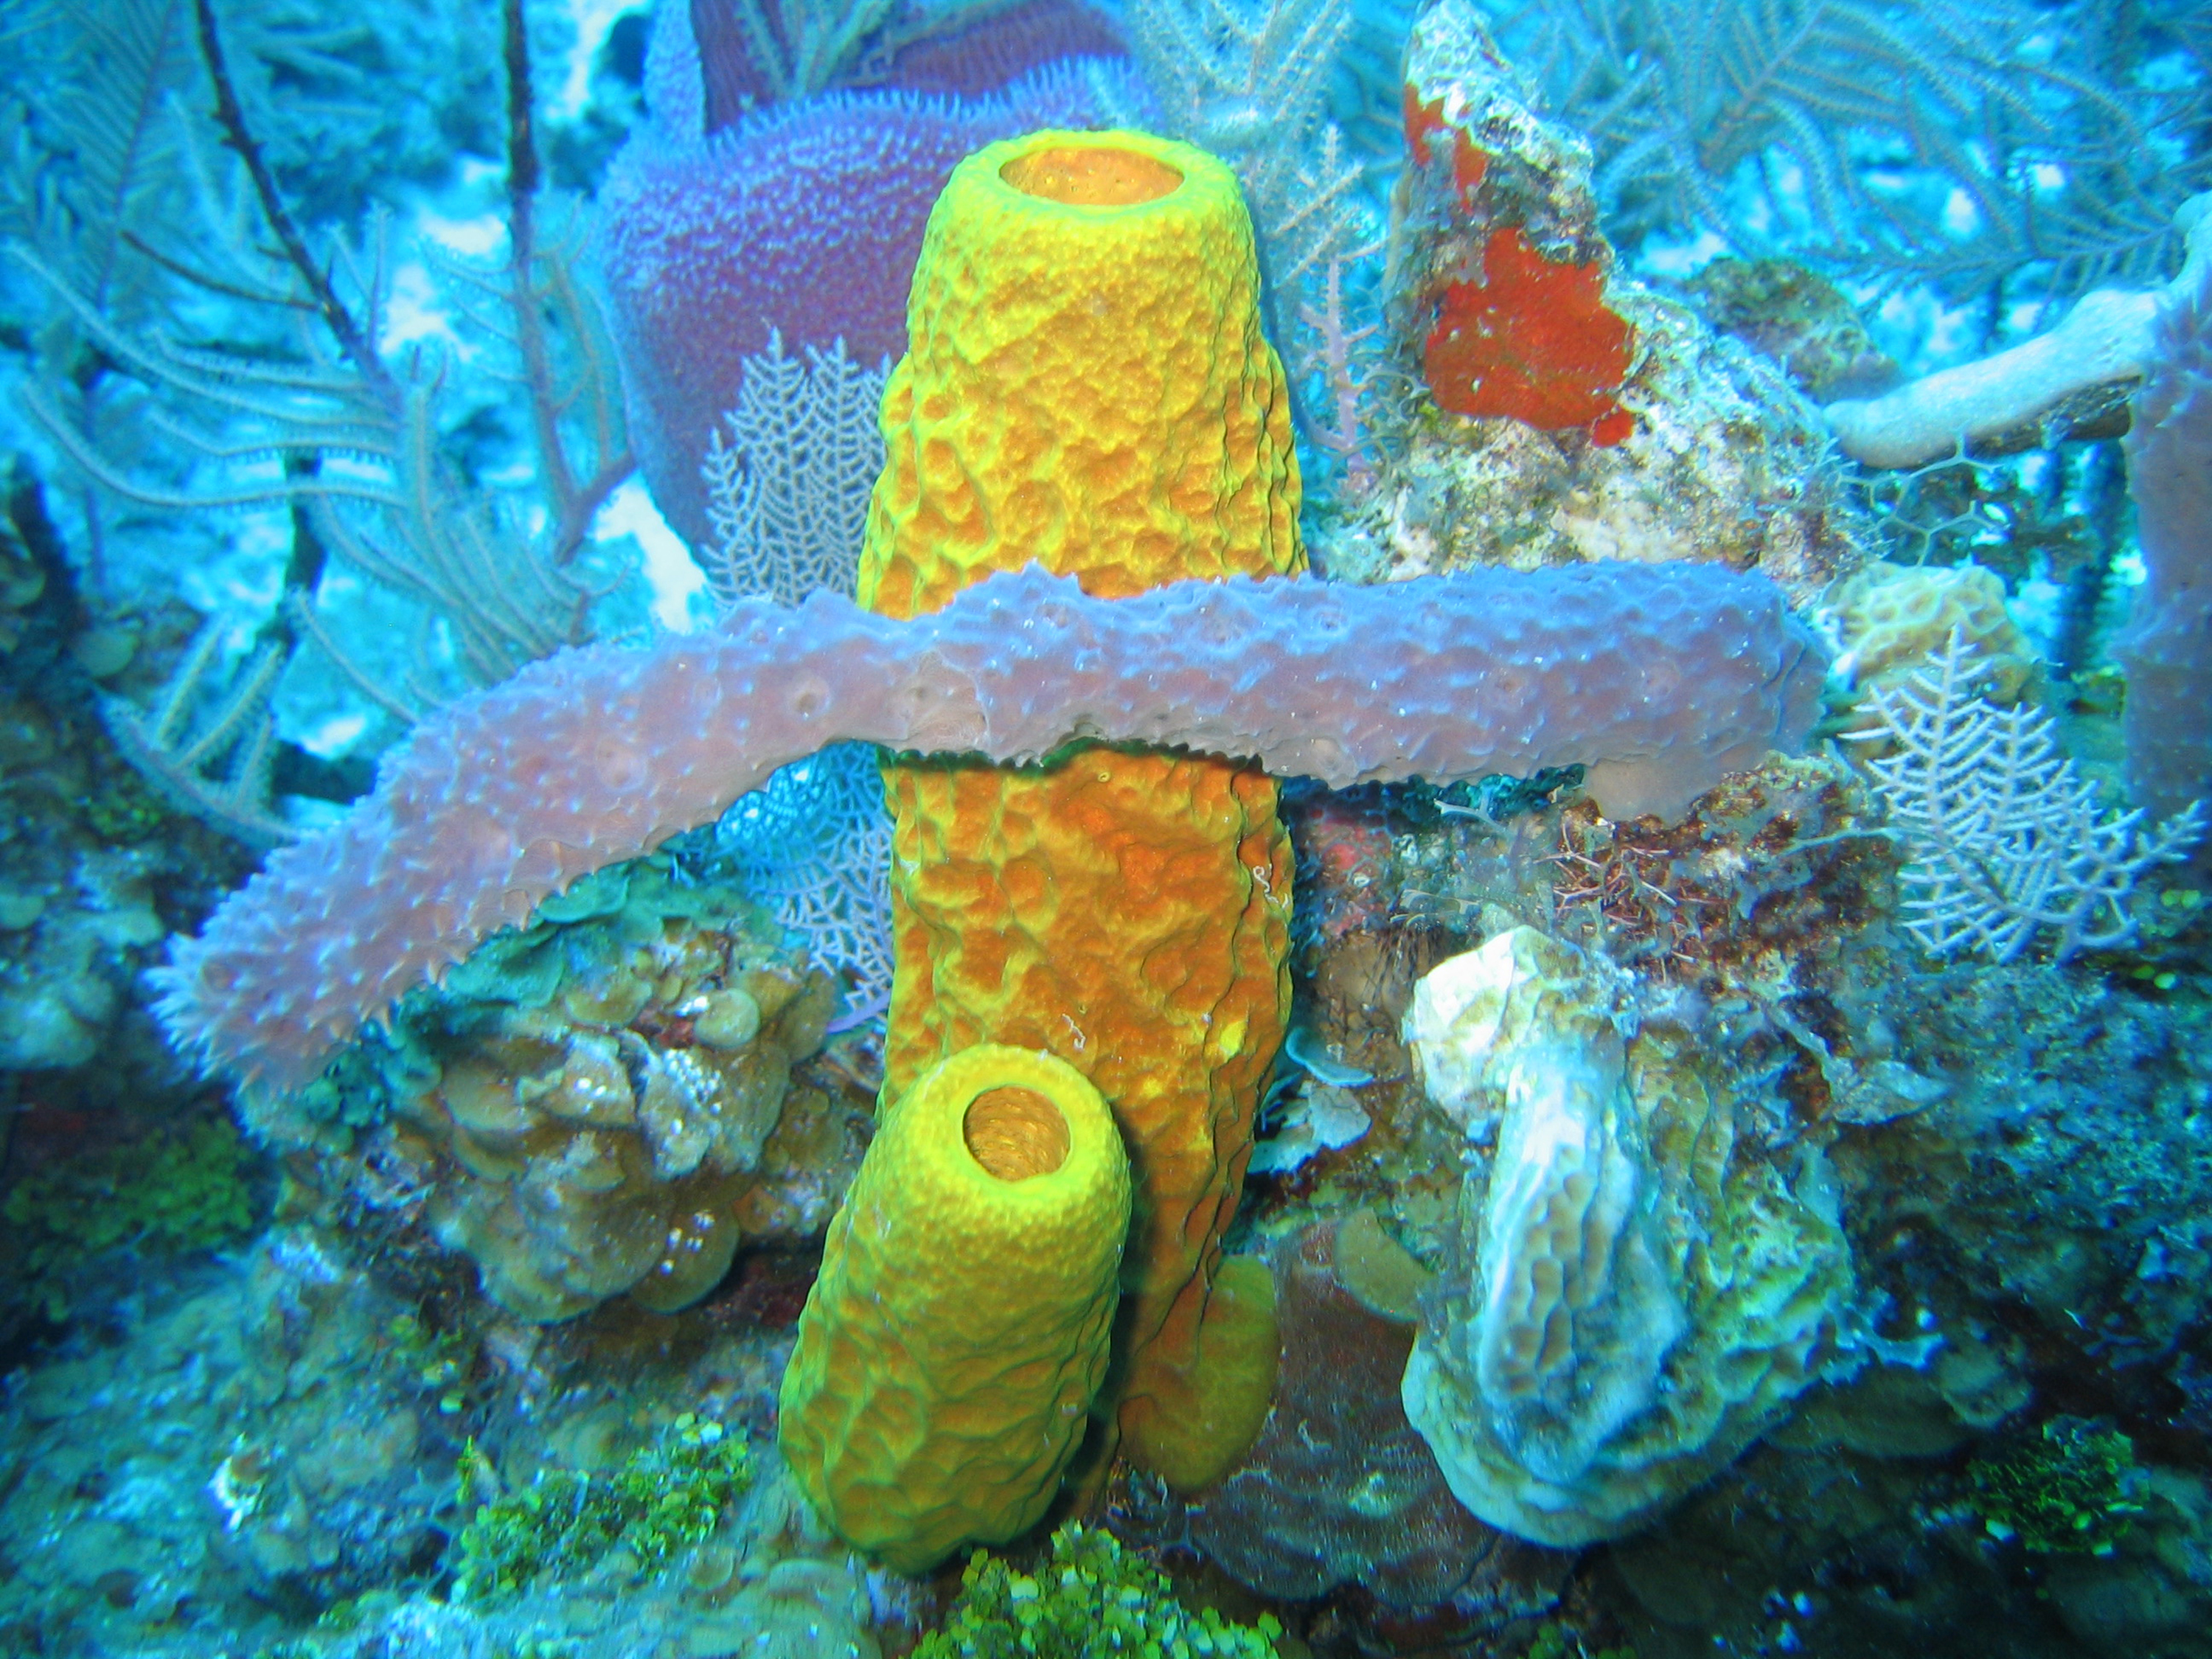 How does the demosponge protect itself?